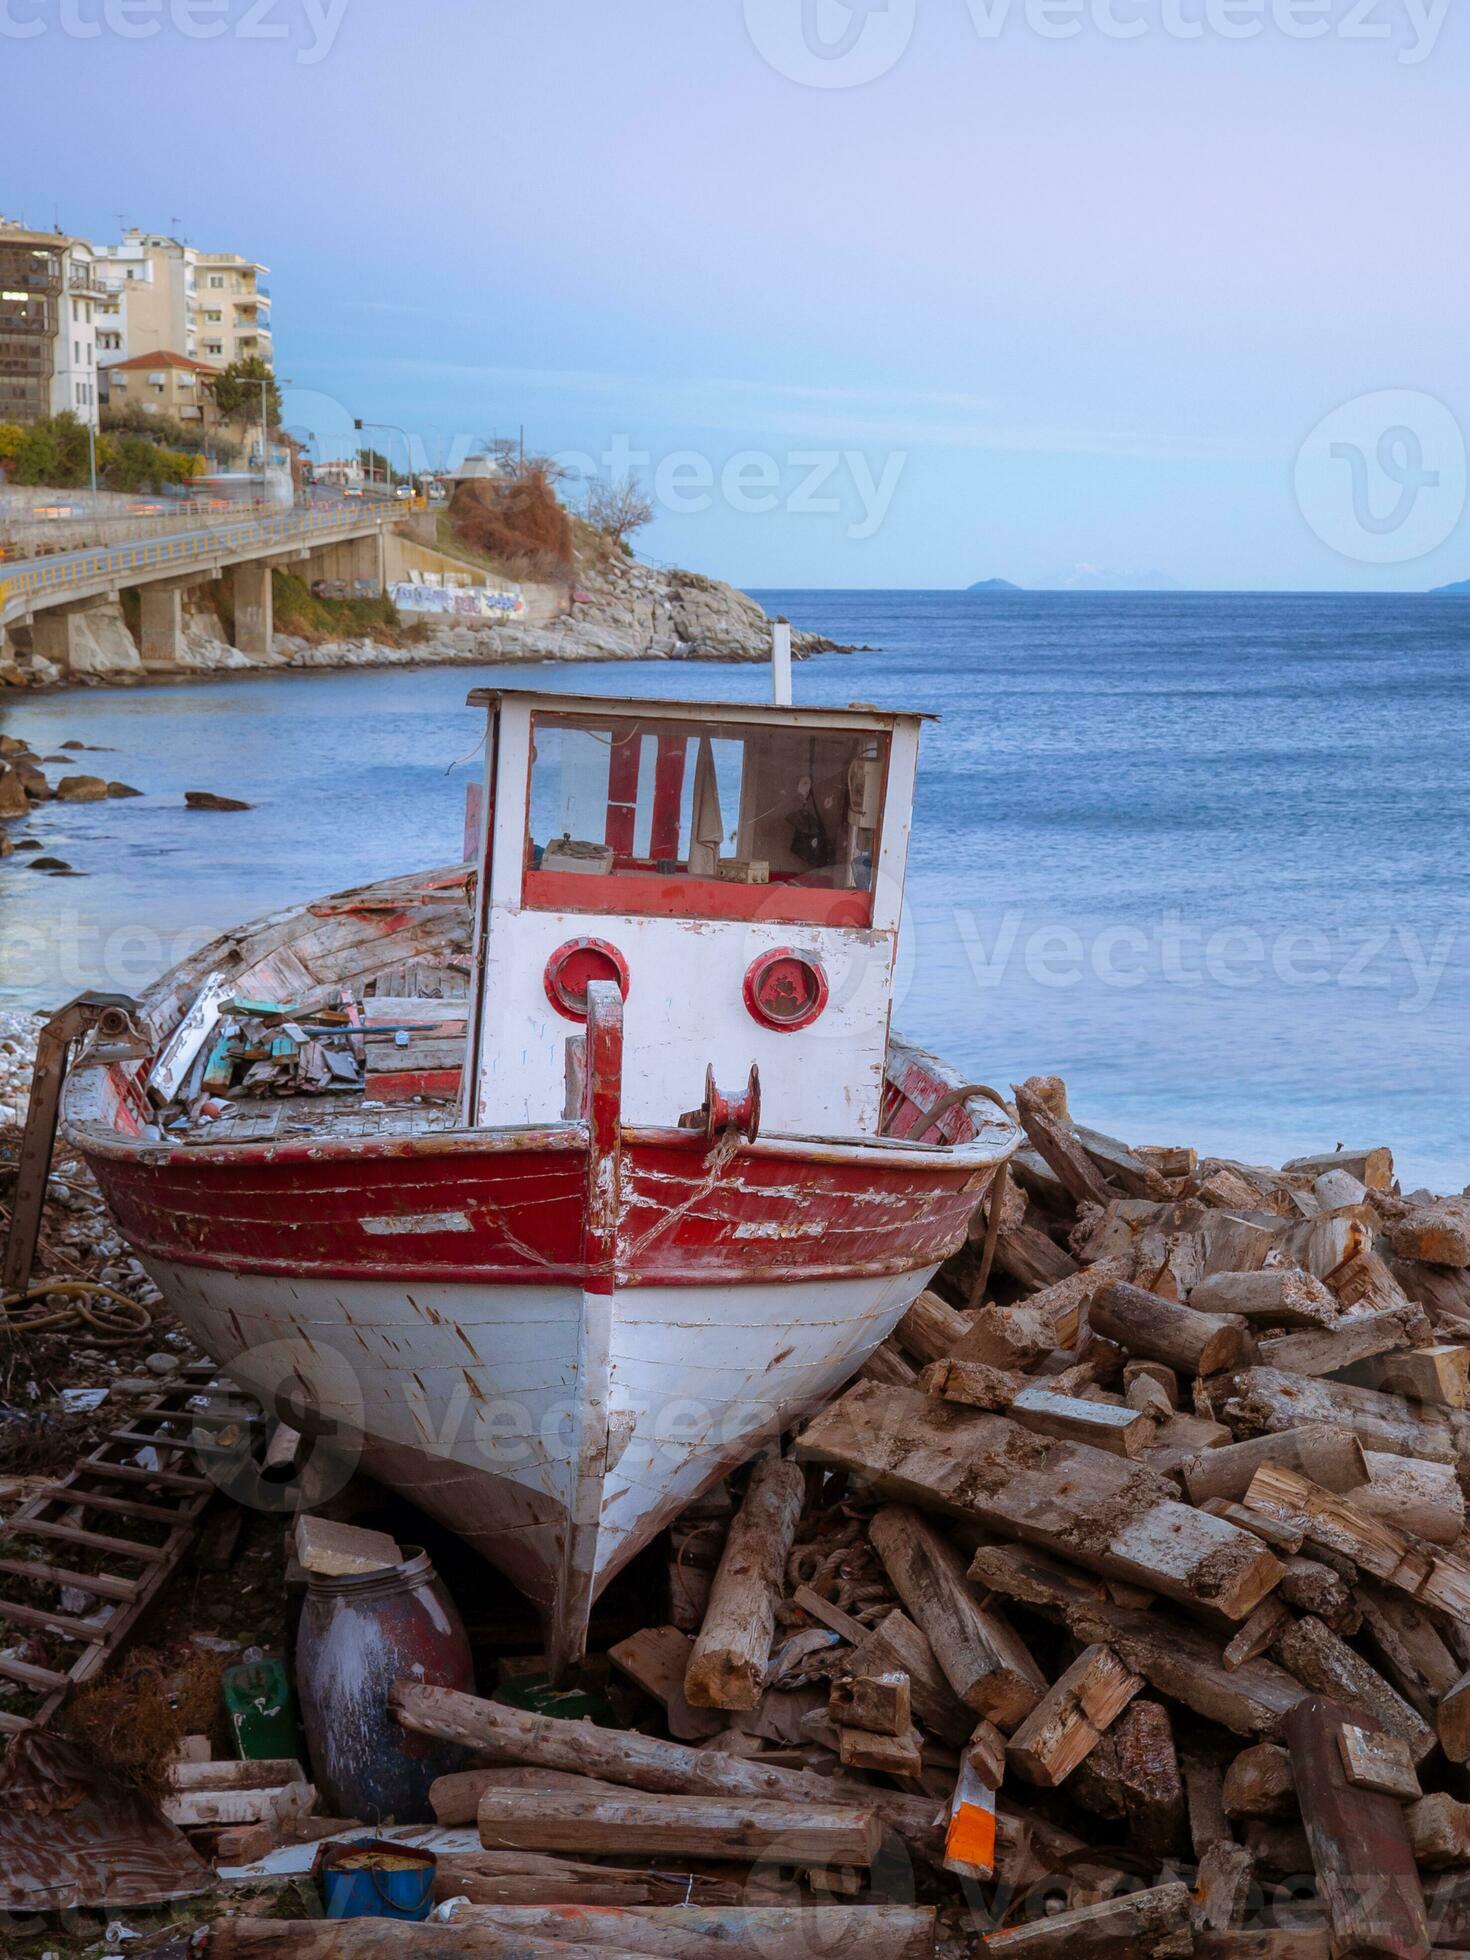 Abandoned red and white small wooden fishing boat 31203457 Stock